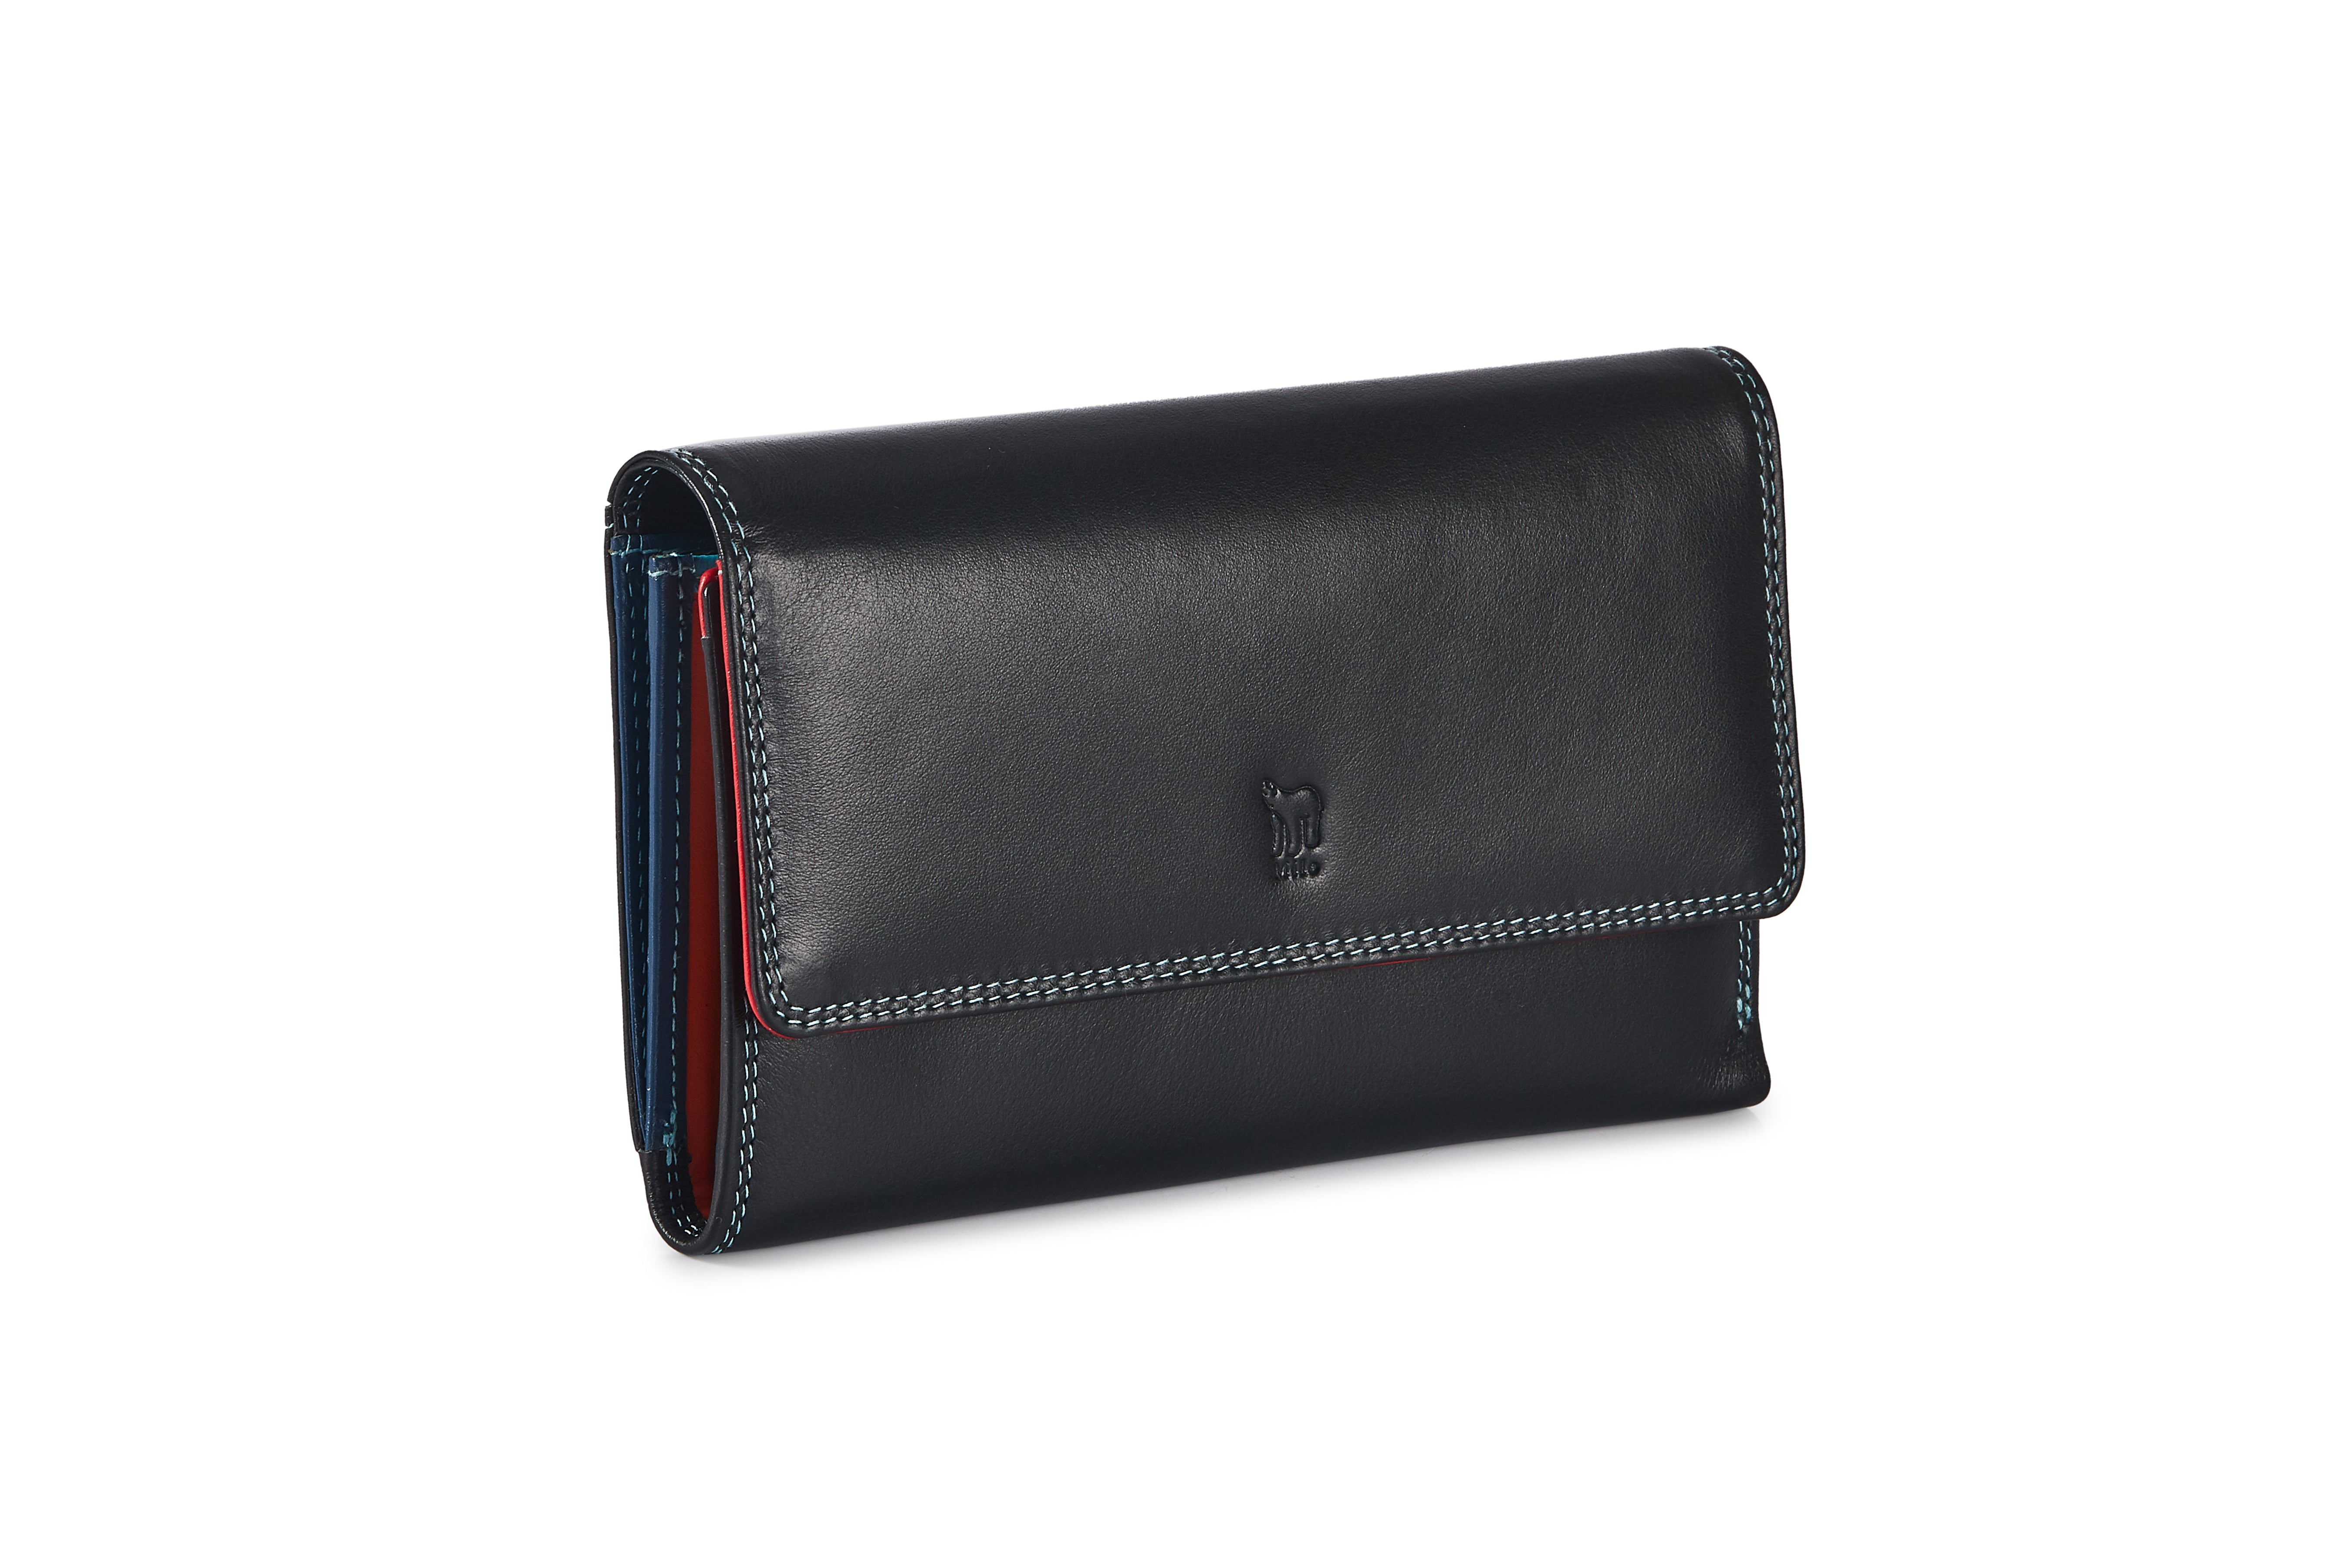 leather wallet woman Silver,Black - LePortefeuille Charlotte